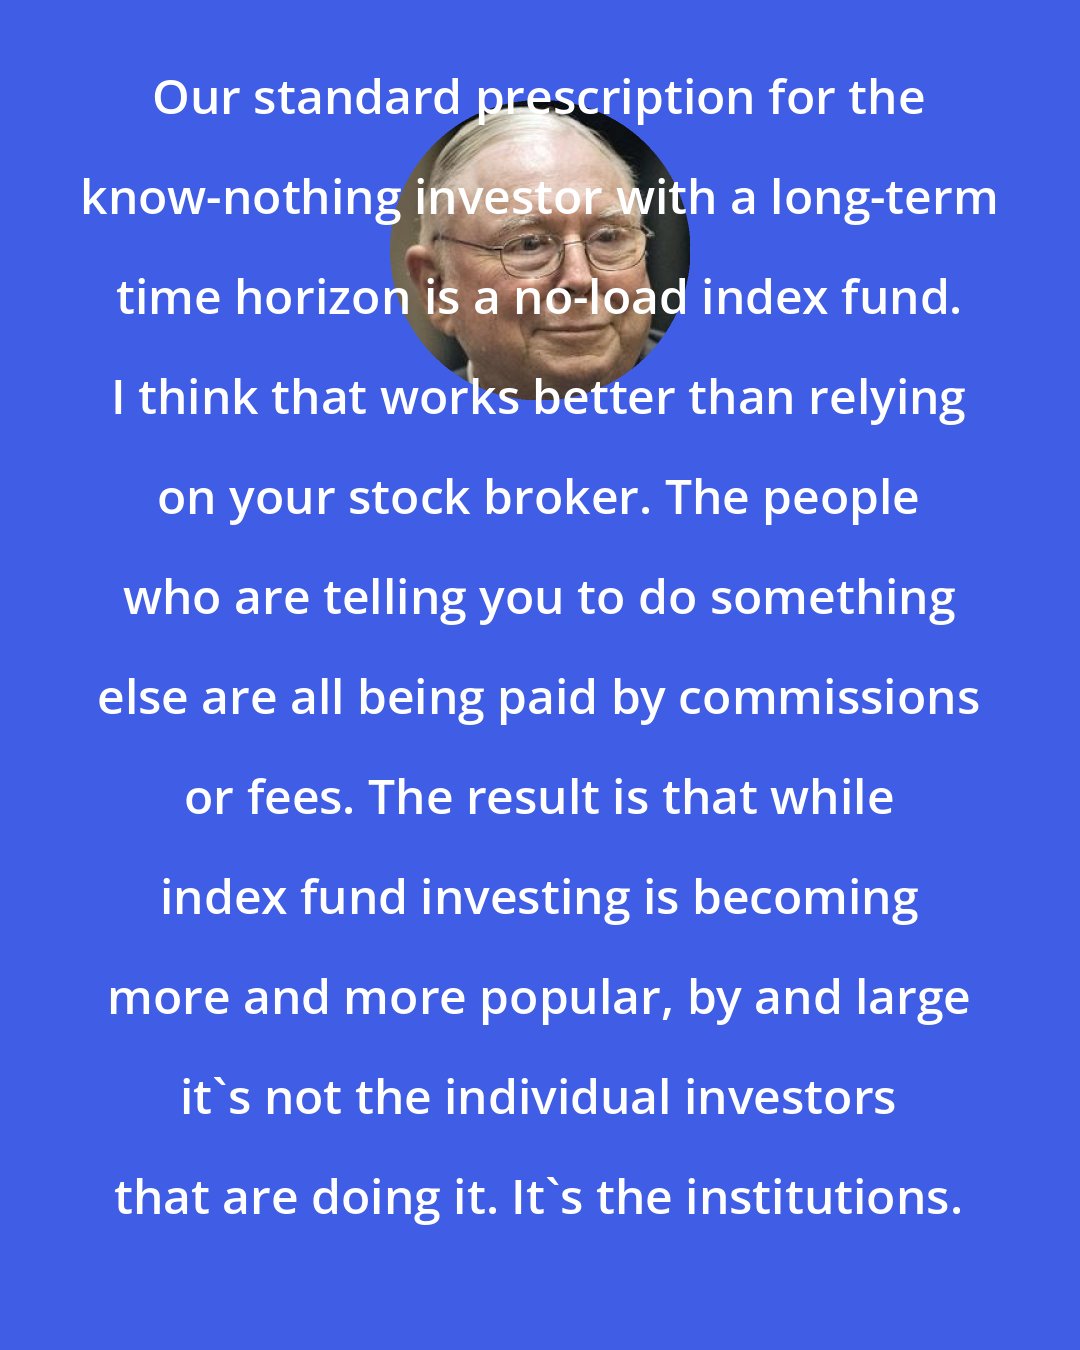 Charlie Munger: Our standard prescription for the know-nothing investor with a long-term time horizon is a no-load index fund. I think that works better than relying on your stock broker. The people who are telling you to do something else are all being paid by commissions or fees. The result is that while index fund investing is becoming more and more popular, by and large it's not the individual investors that are doing it. It's the institutions.